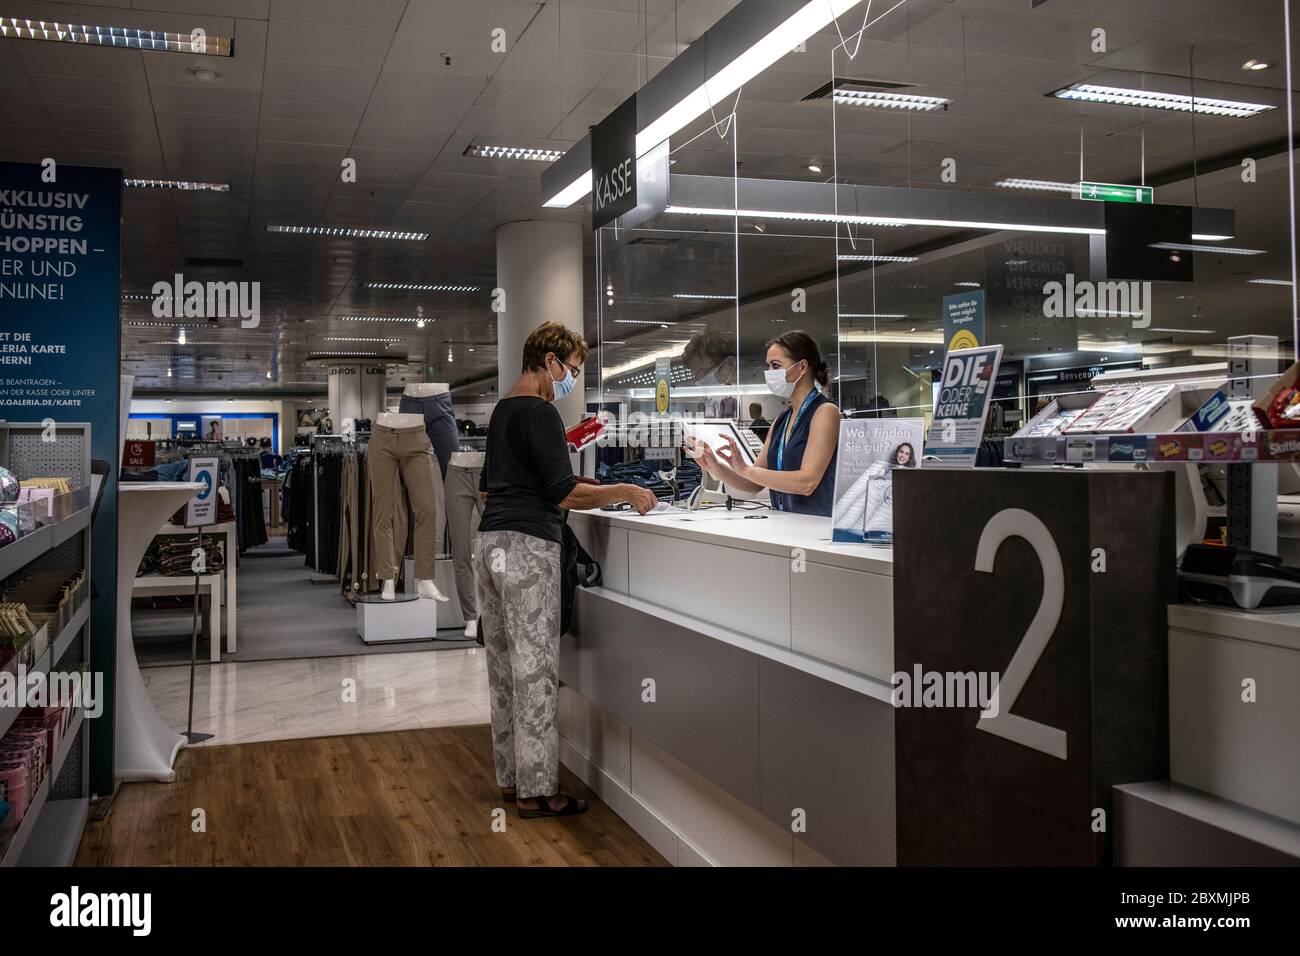 Shoppers in a Kaufhof department store in Braunschweig wearing mandatory face masks after the coronavirus lockdown was lifted, north-central Germany. Stock Photo